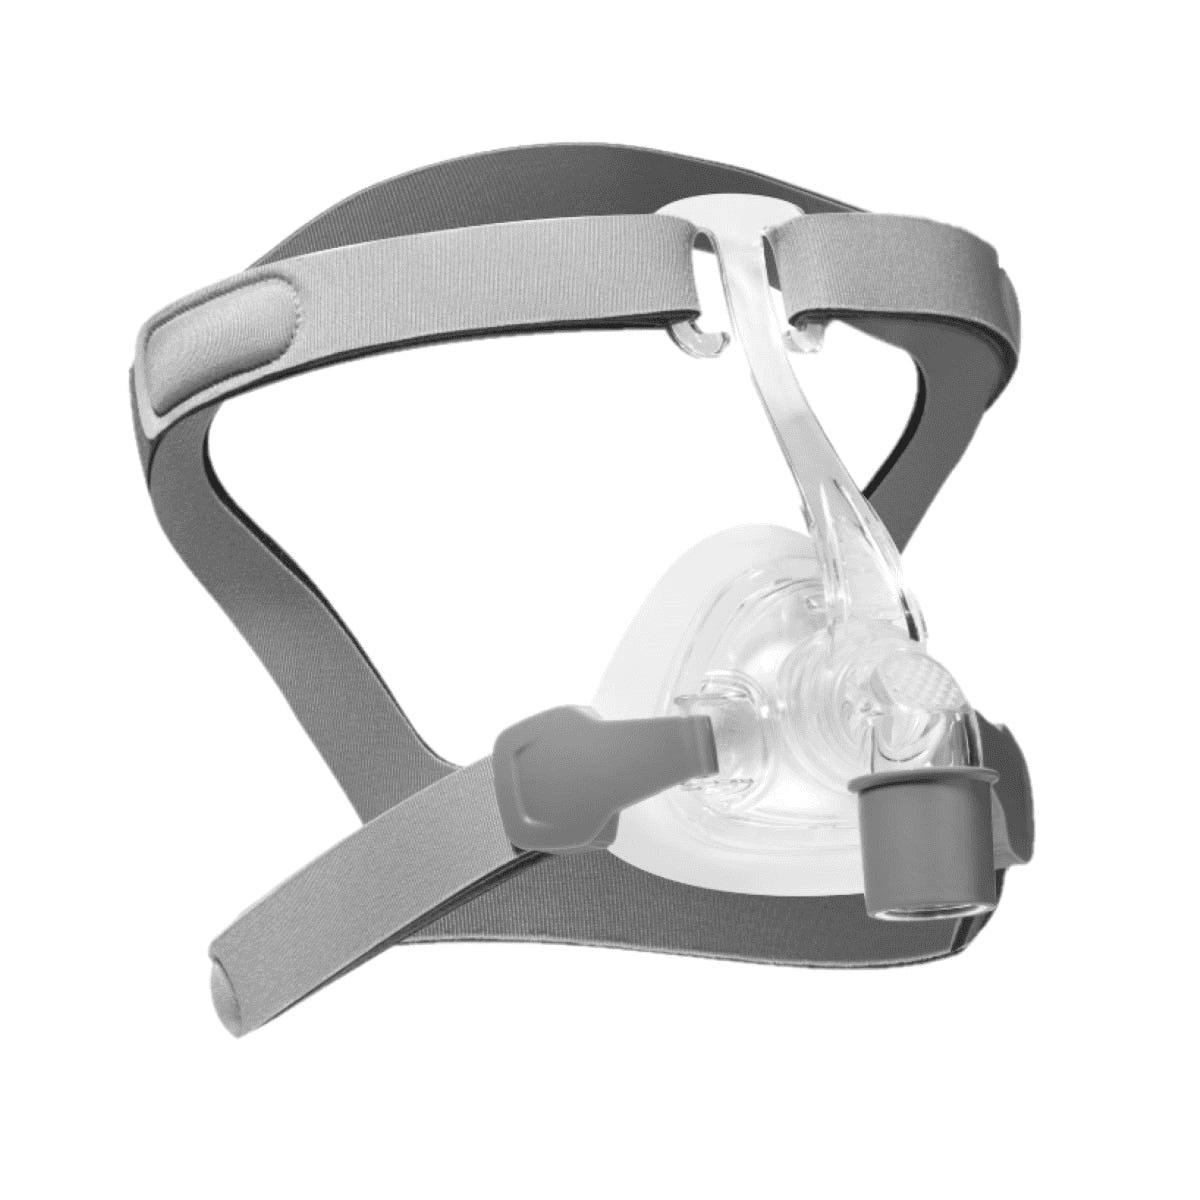 Side view of Viva Nasal Mask with headgear Fit Pack by 3B Medical.